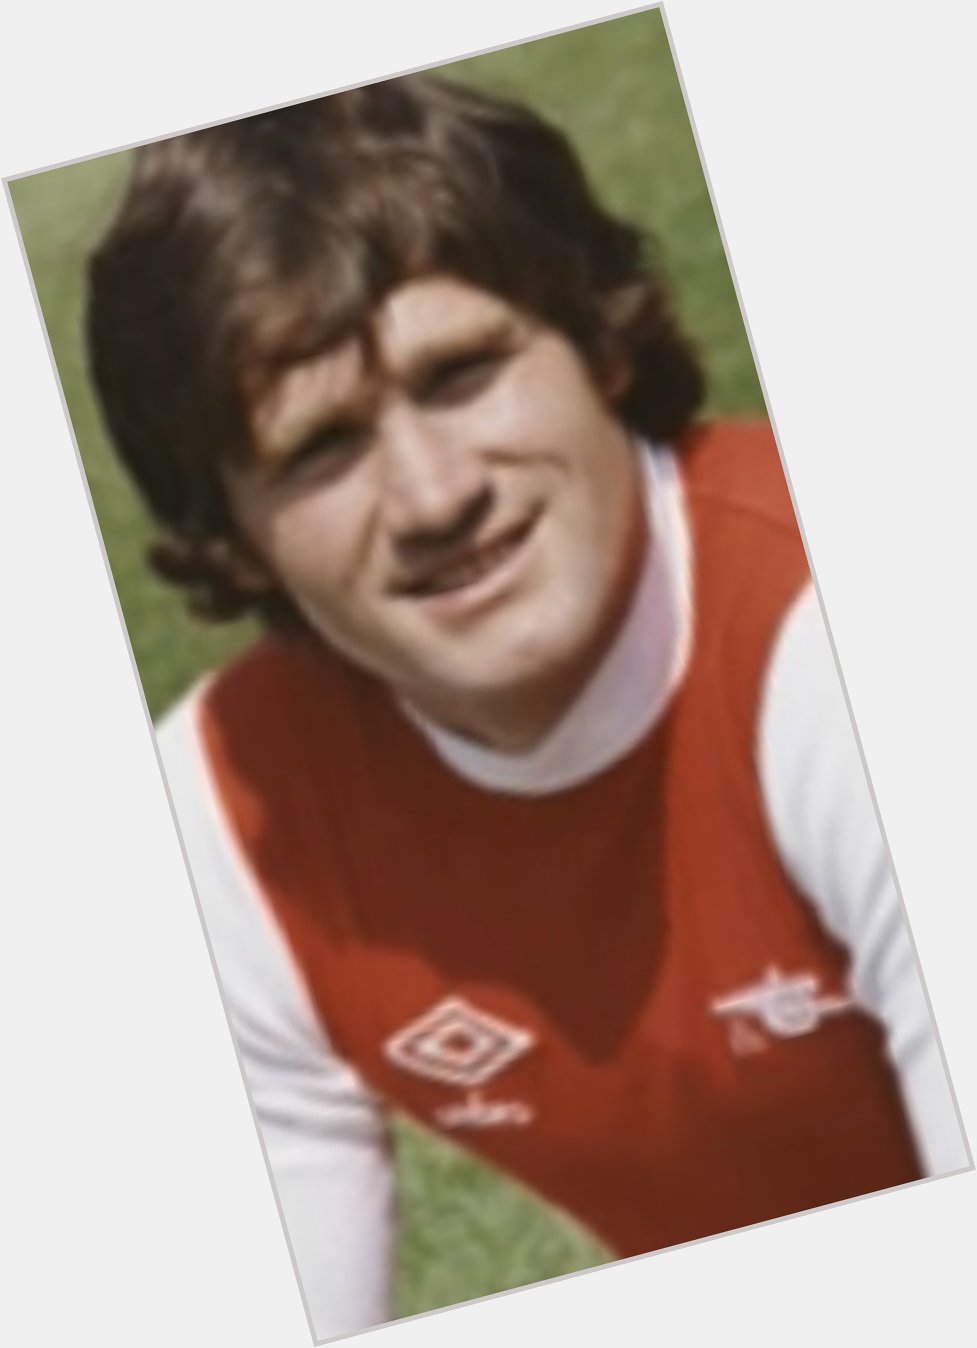 Happy Birthday Pat Rice without doubt a true Arsenal legend. 